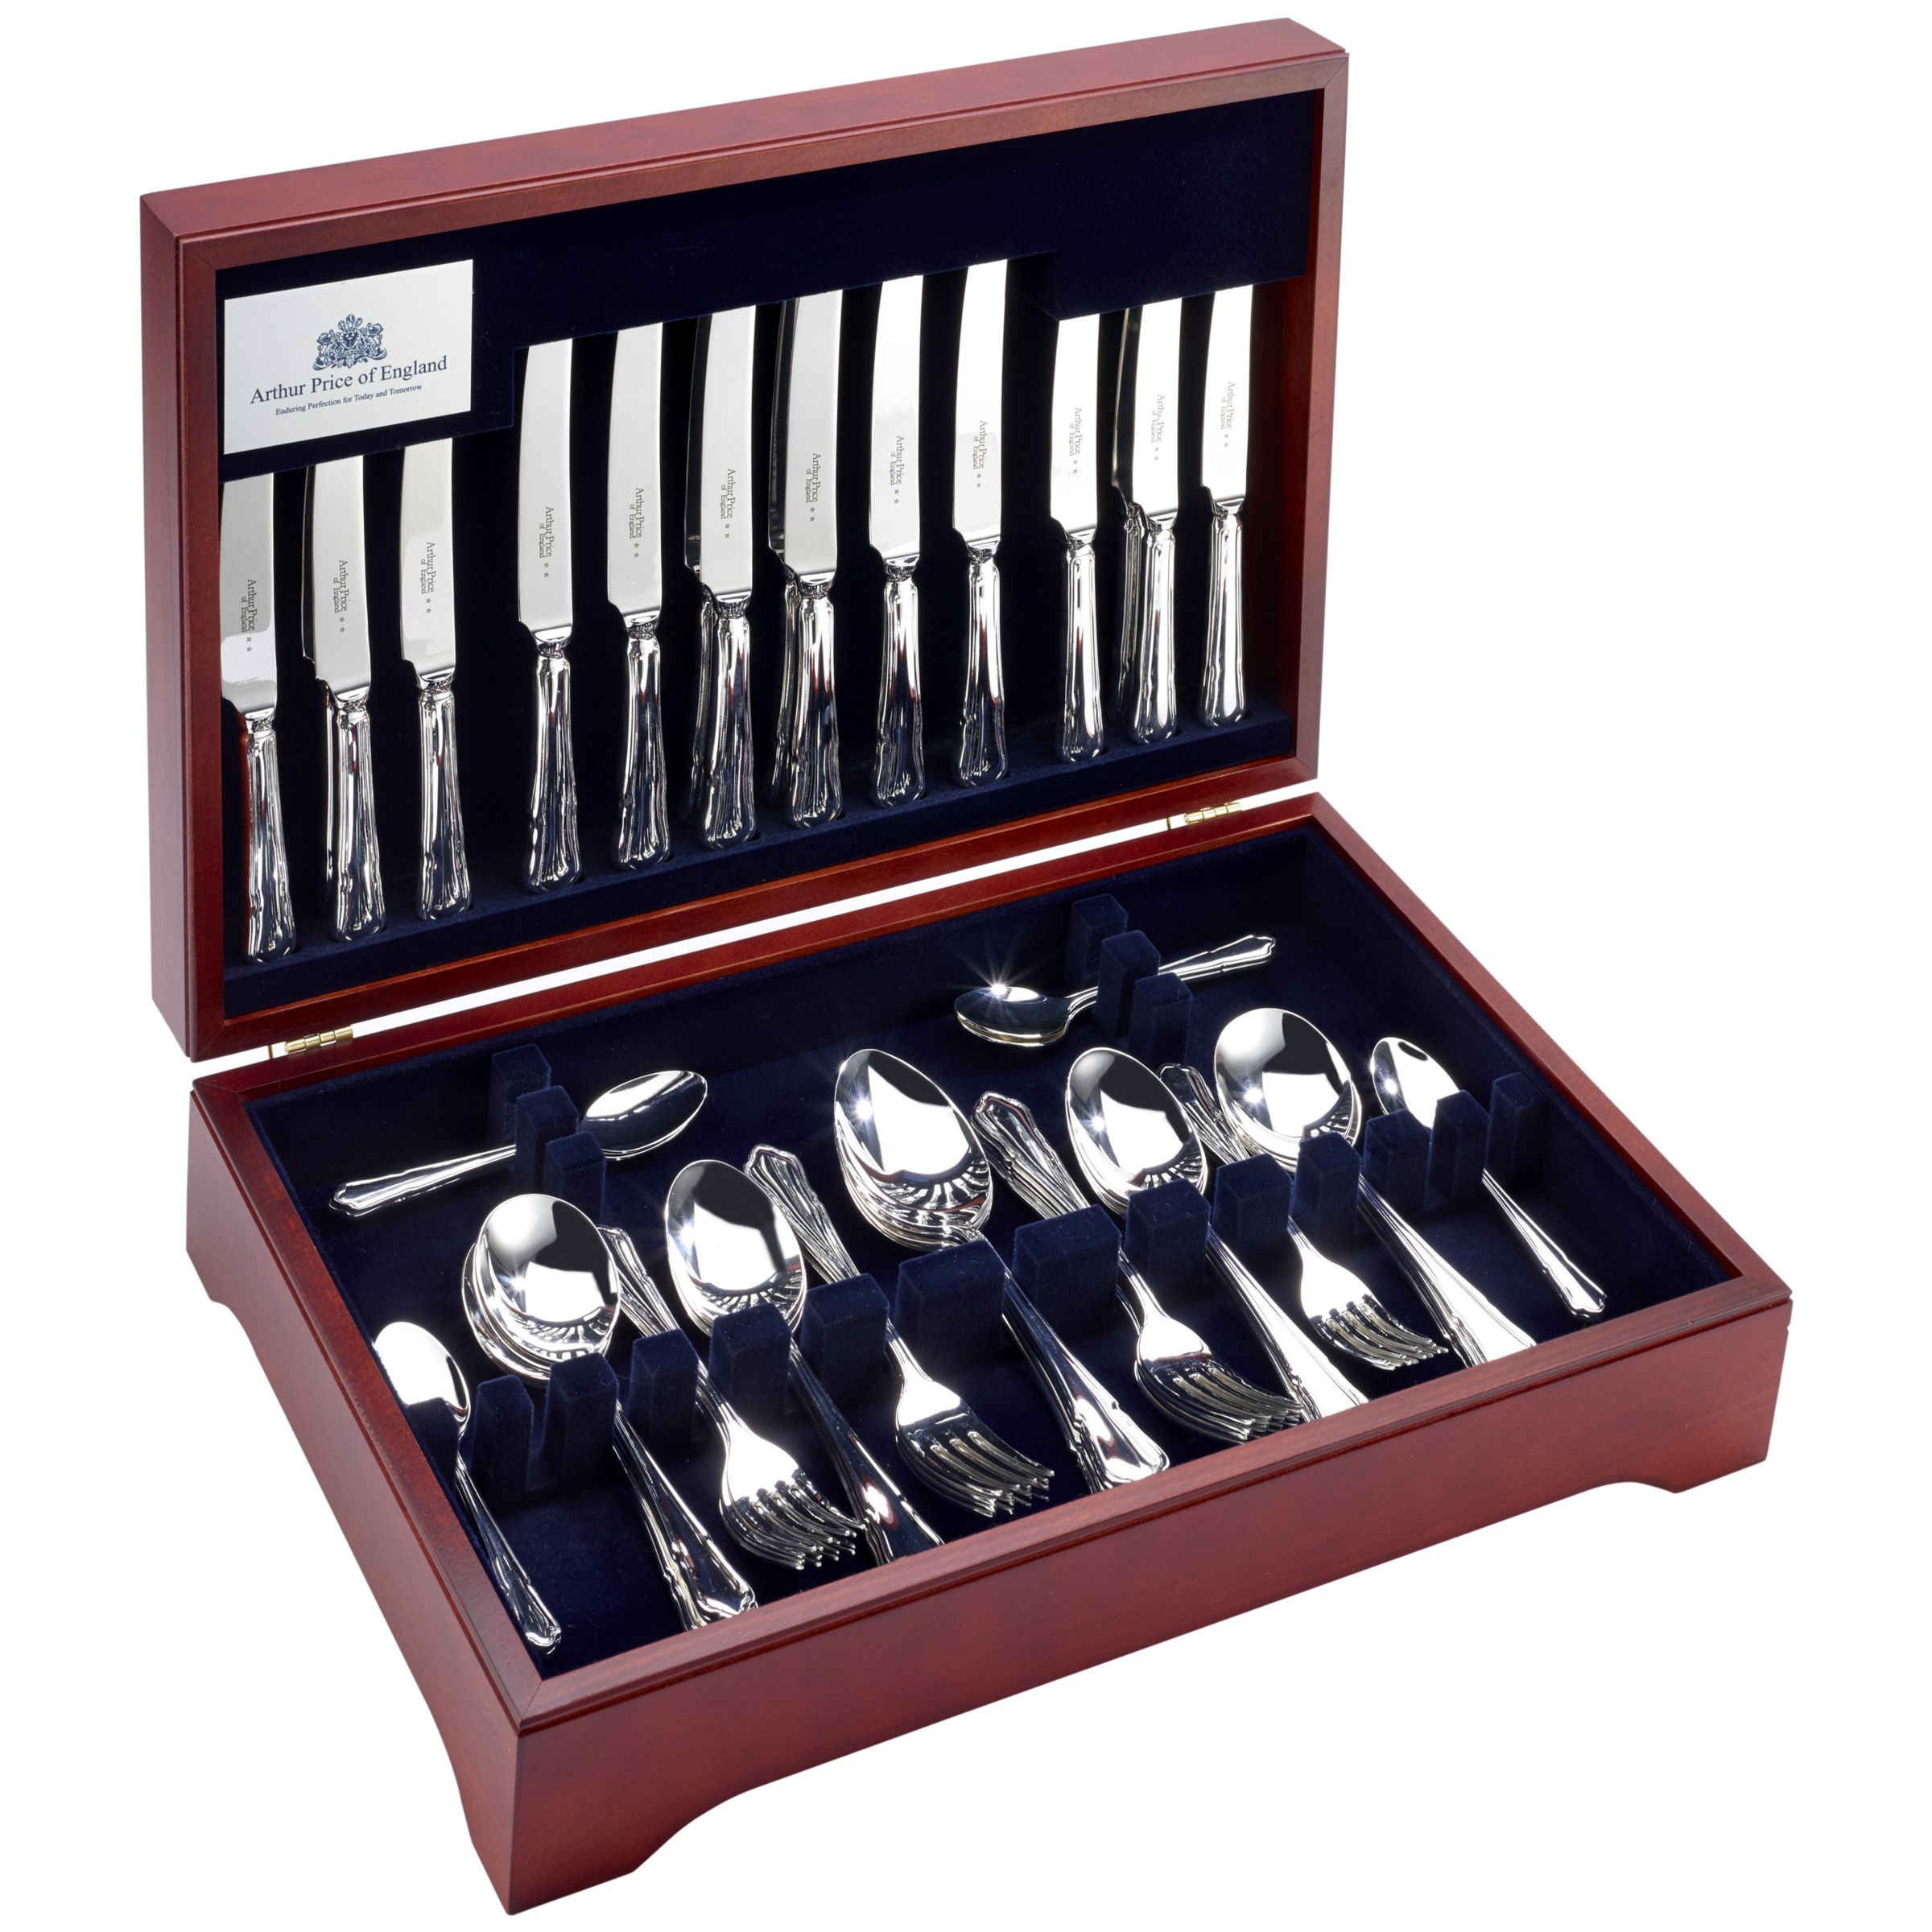 Arthur Price Dubarry Cutlery Canteen, Sovereign Silver Plated, 84 Piece/8 Place Settings